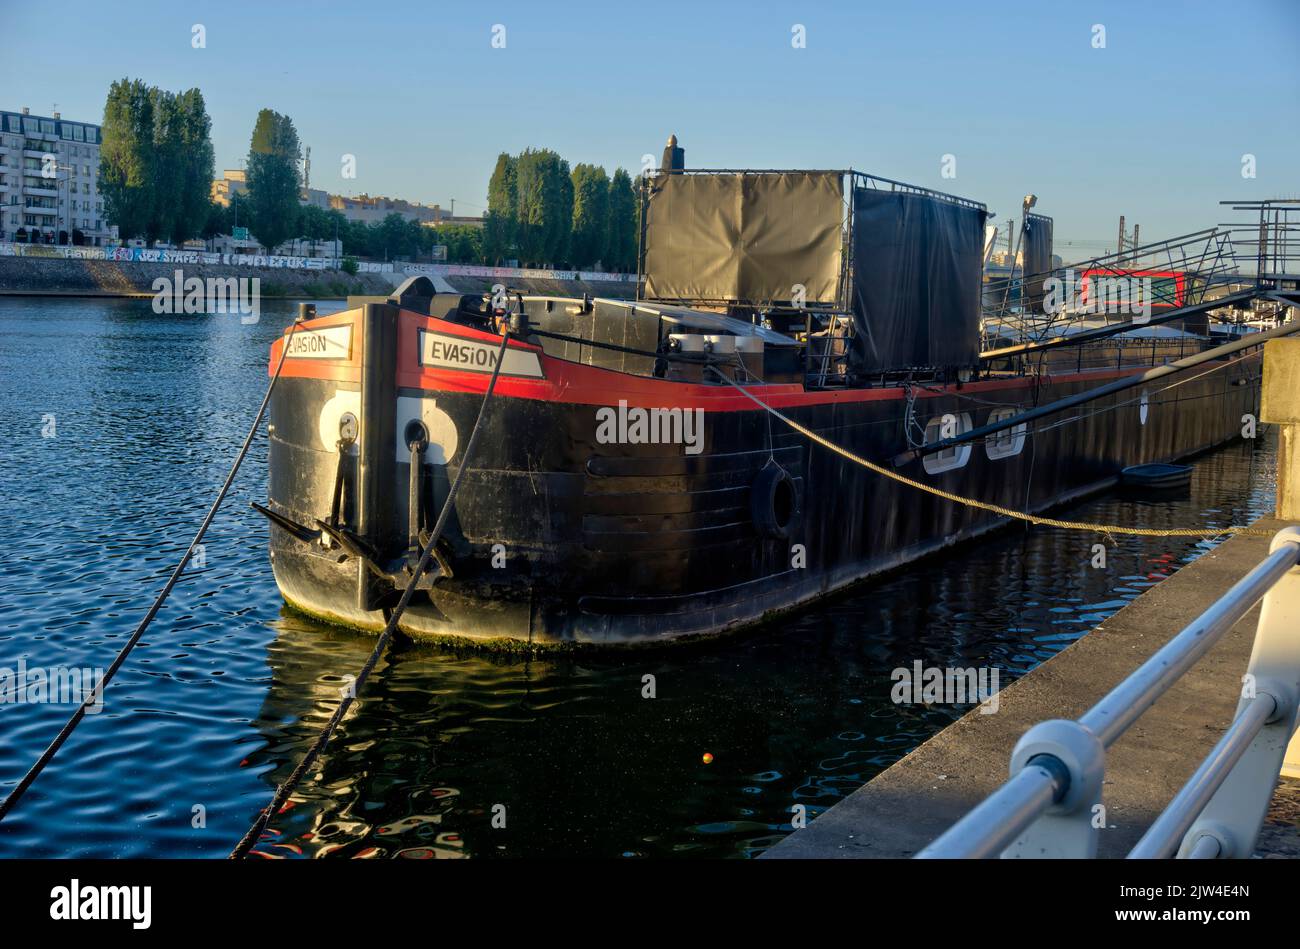 Paris, France - May 27, 2022: Boat called Evasion moored on bank of River seine in evening sunlight Stock Photo